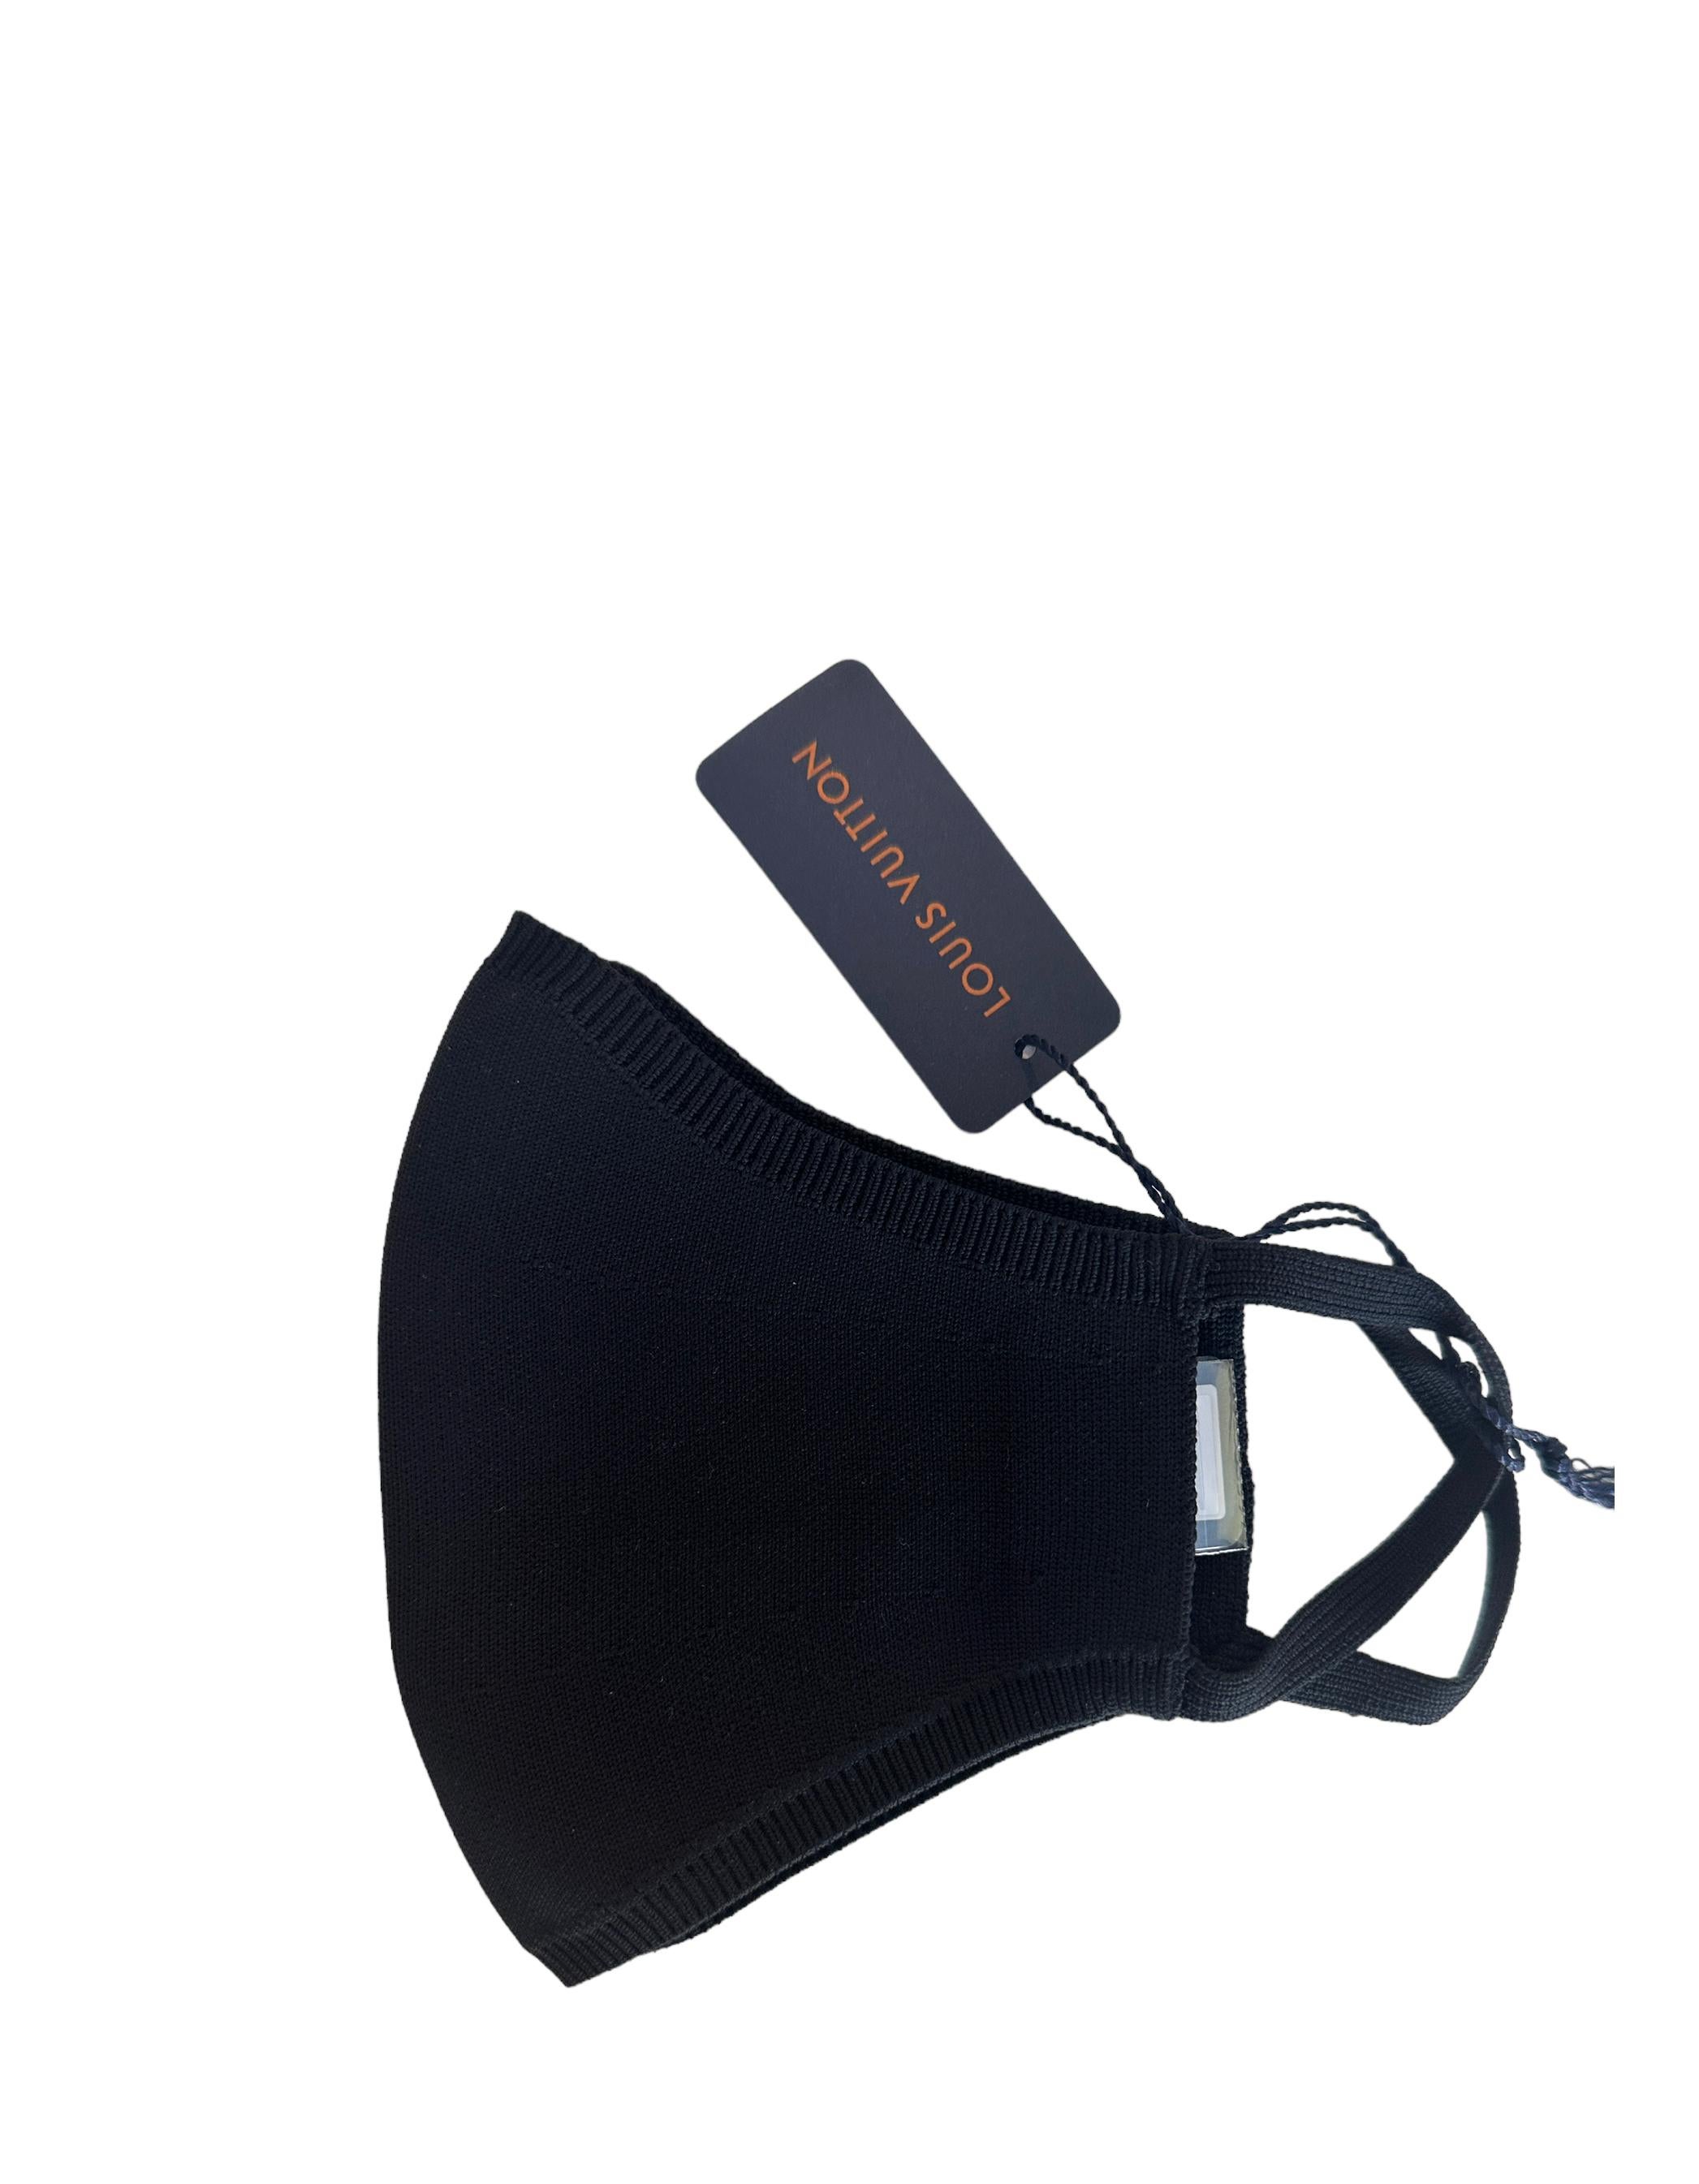 Louis Vuitton NEW Black Logo Face Mask 

Made In: Italy
Composition: 100% polymide
Colors: Black/white
Condition: New with tags
Includes: Louis Vuitton dustbag and pouch 